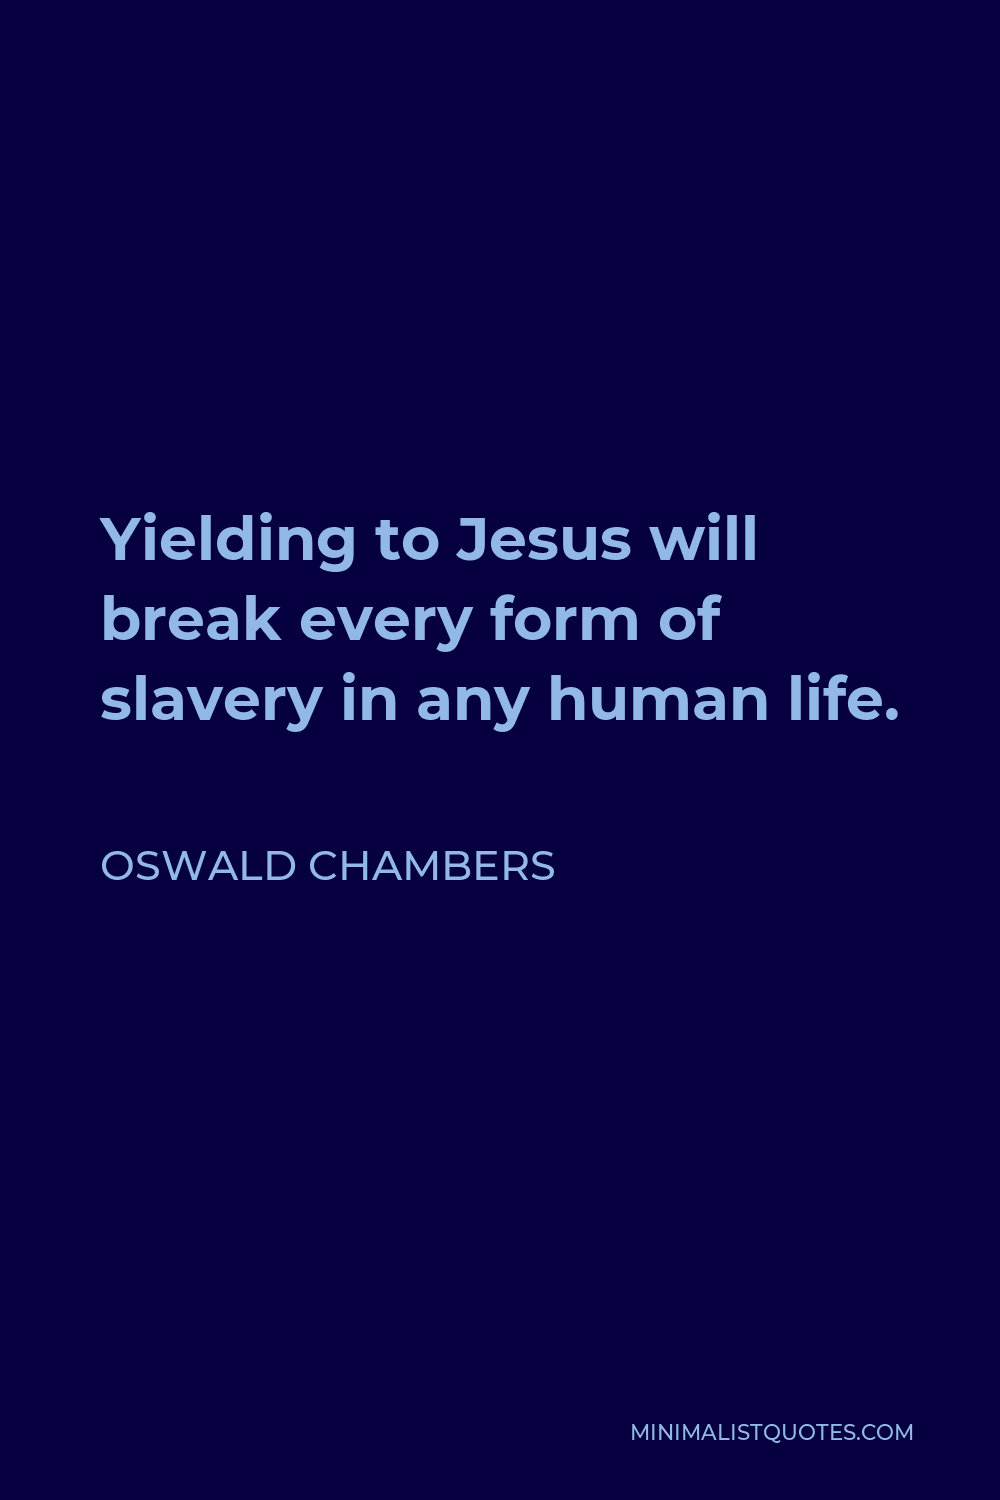 Oswald Chambers Quote - Yielding to Jesus will break every form of slavery in any human life.